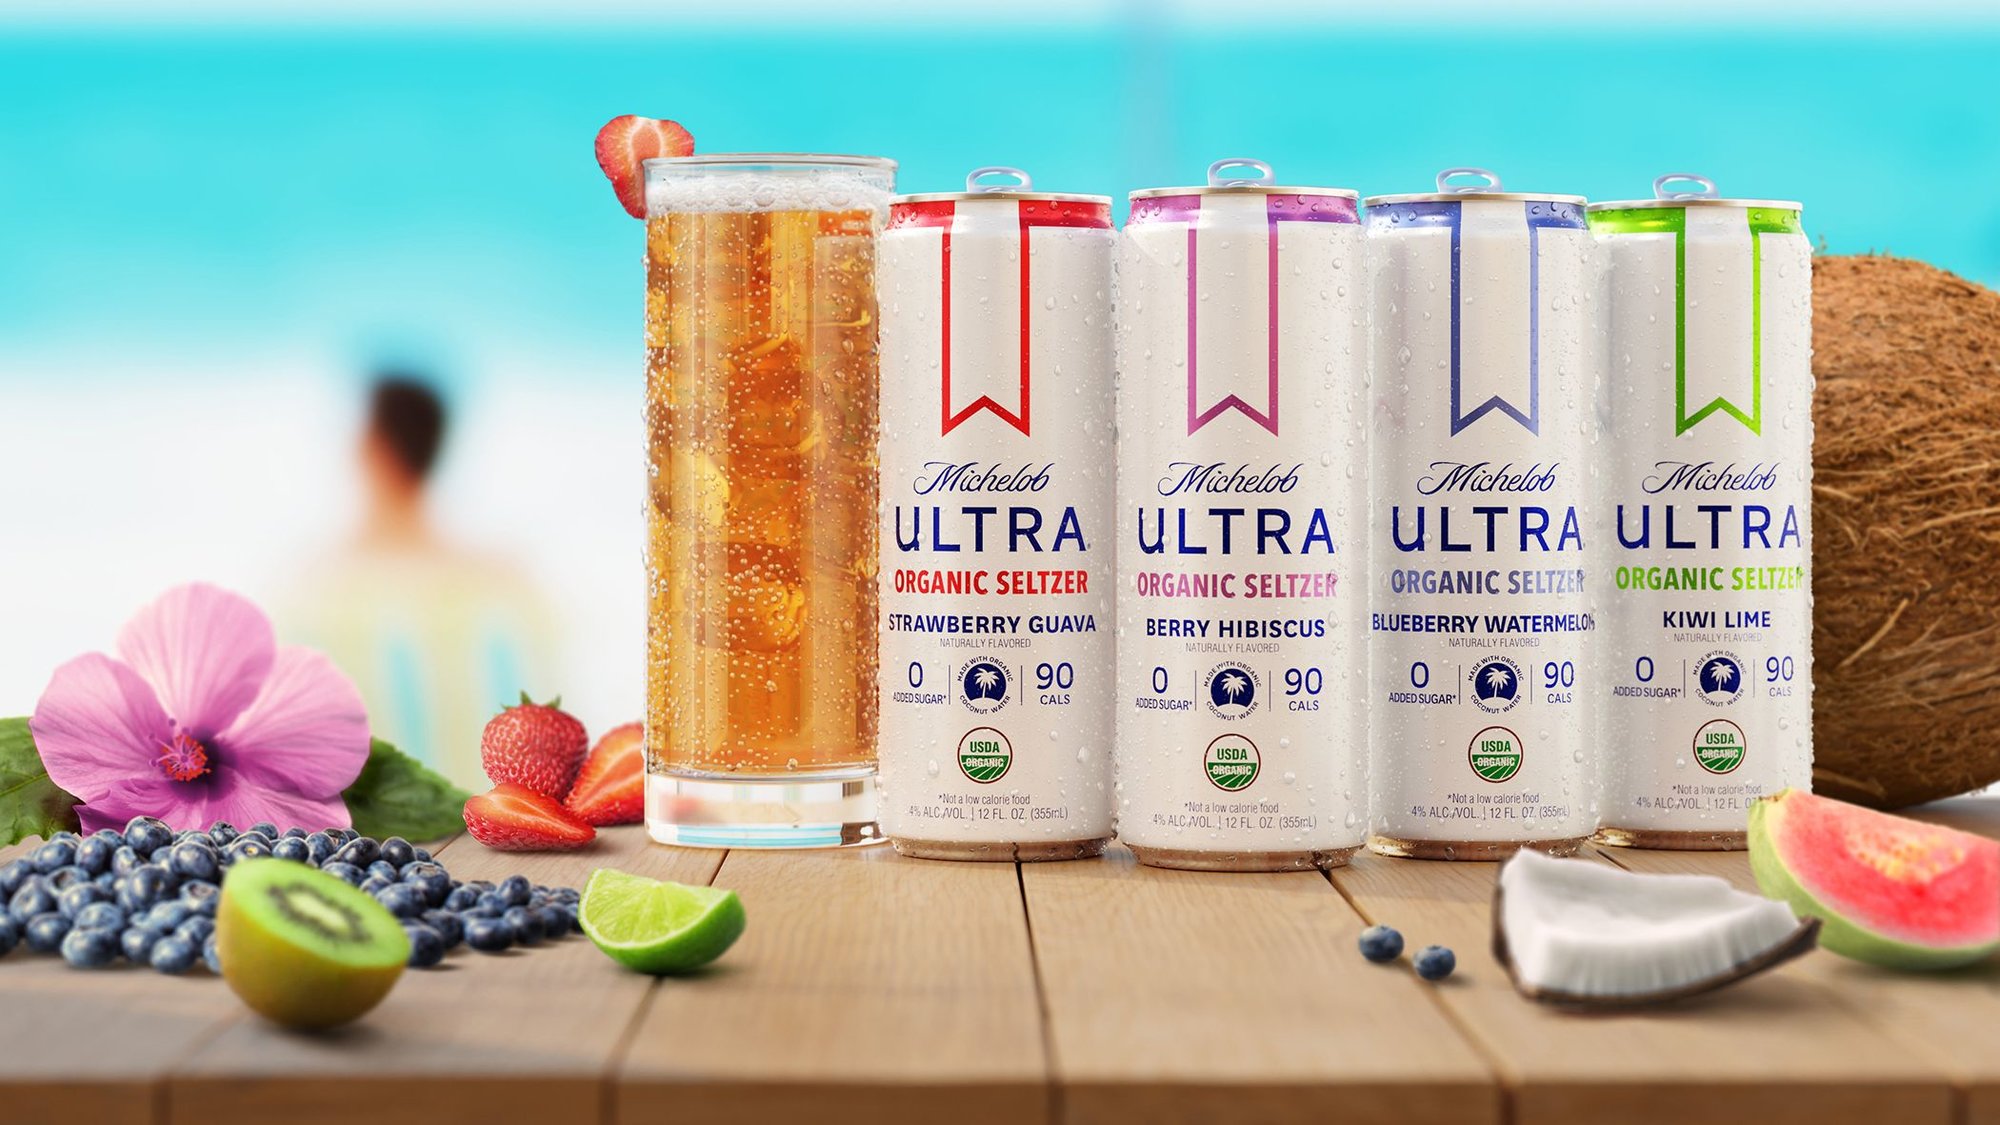 This is the main background for the Michelob Ultra Organic Seltzer Grapefruit Melon